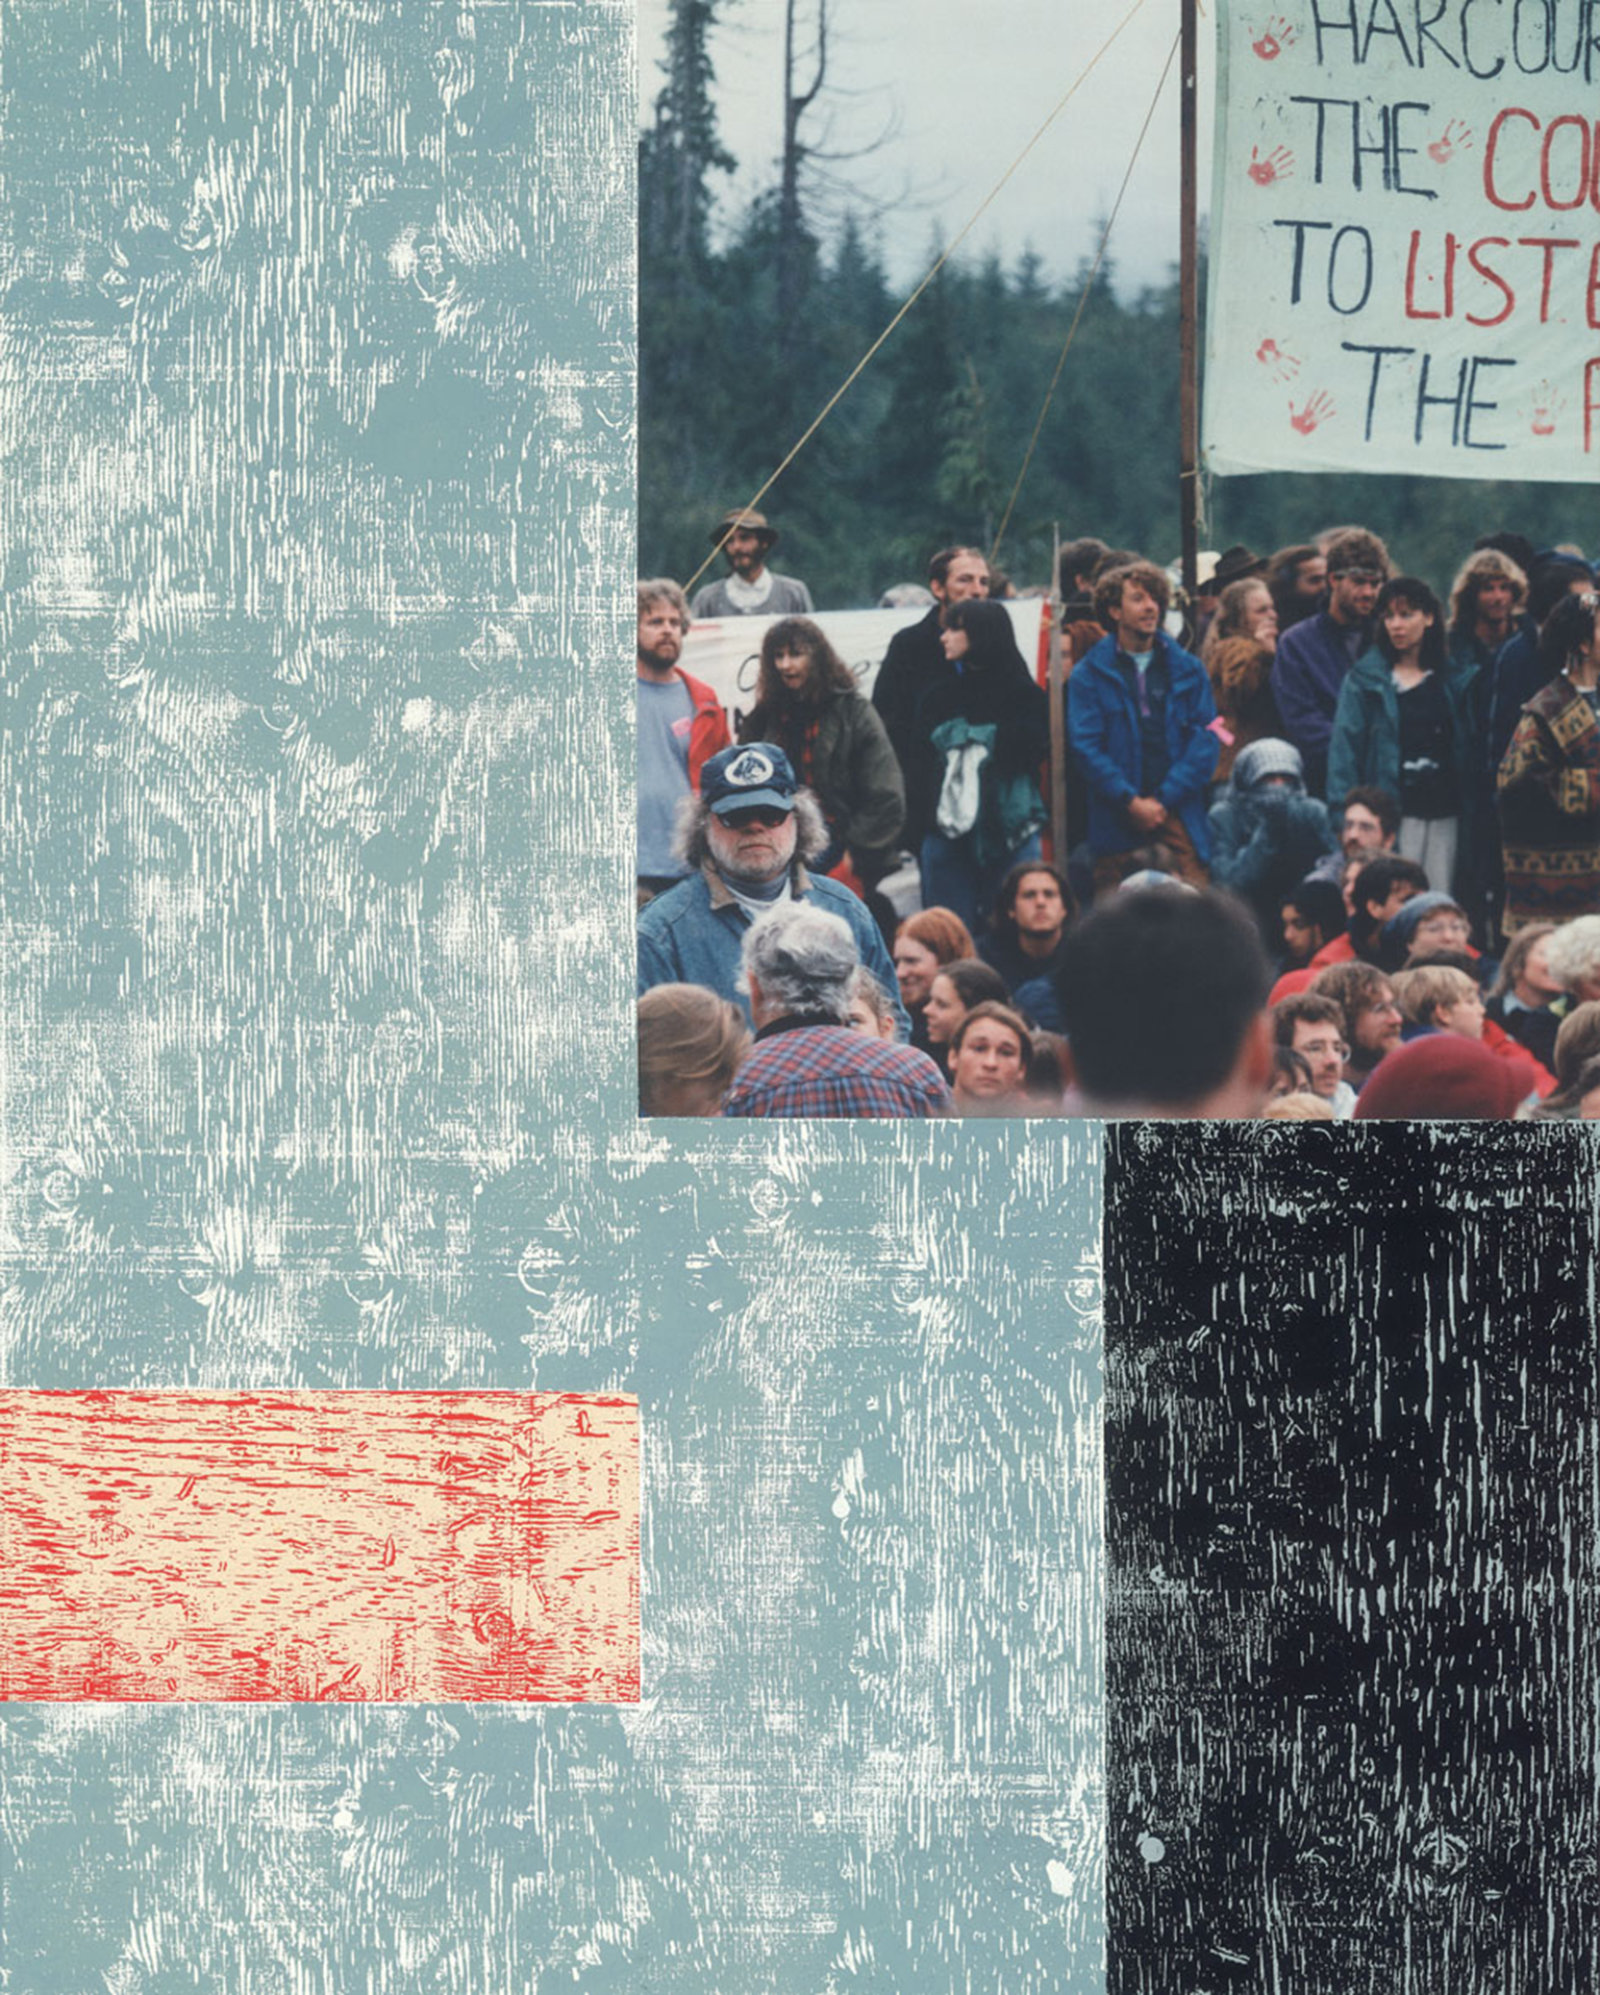 Ian Wallace, Clayoquot Protest (August 9, 1993) I, 1993–1995, photolaminate with acrylic on canvas, 120 x 72 x 1 in. (305 x 184 x 3 cm)